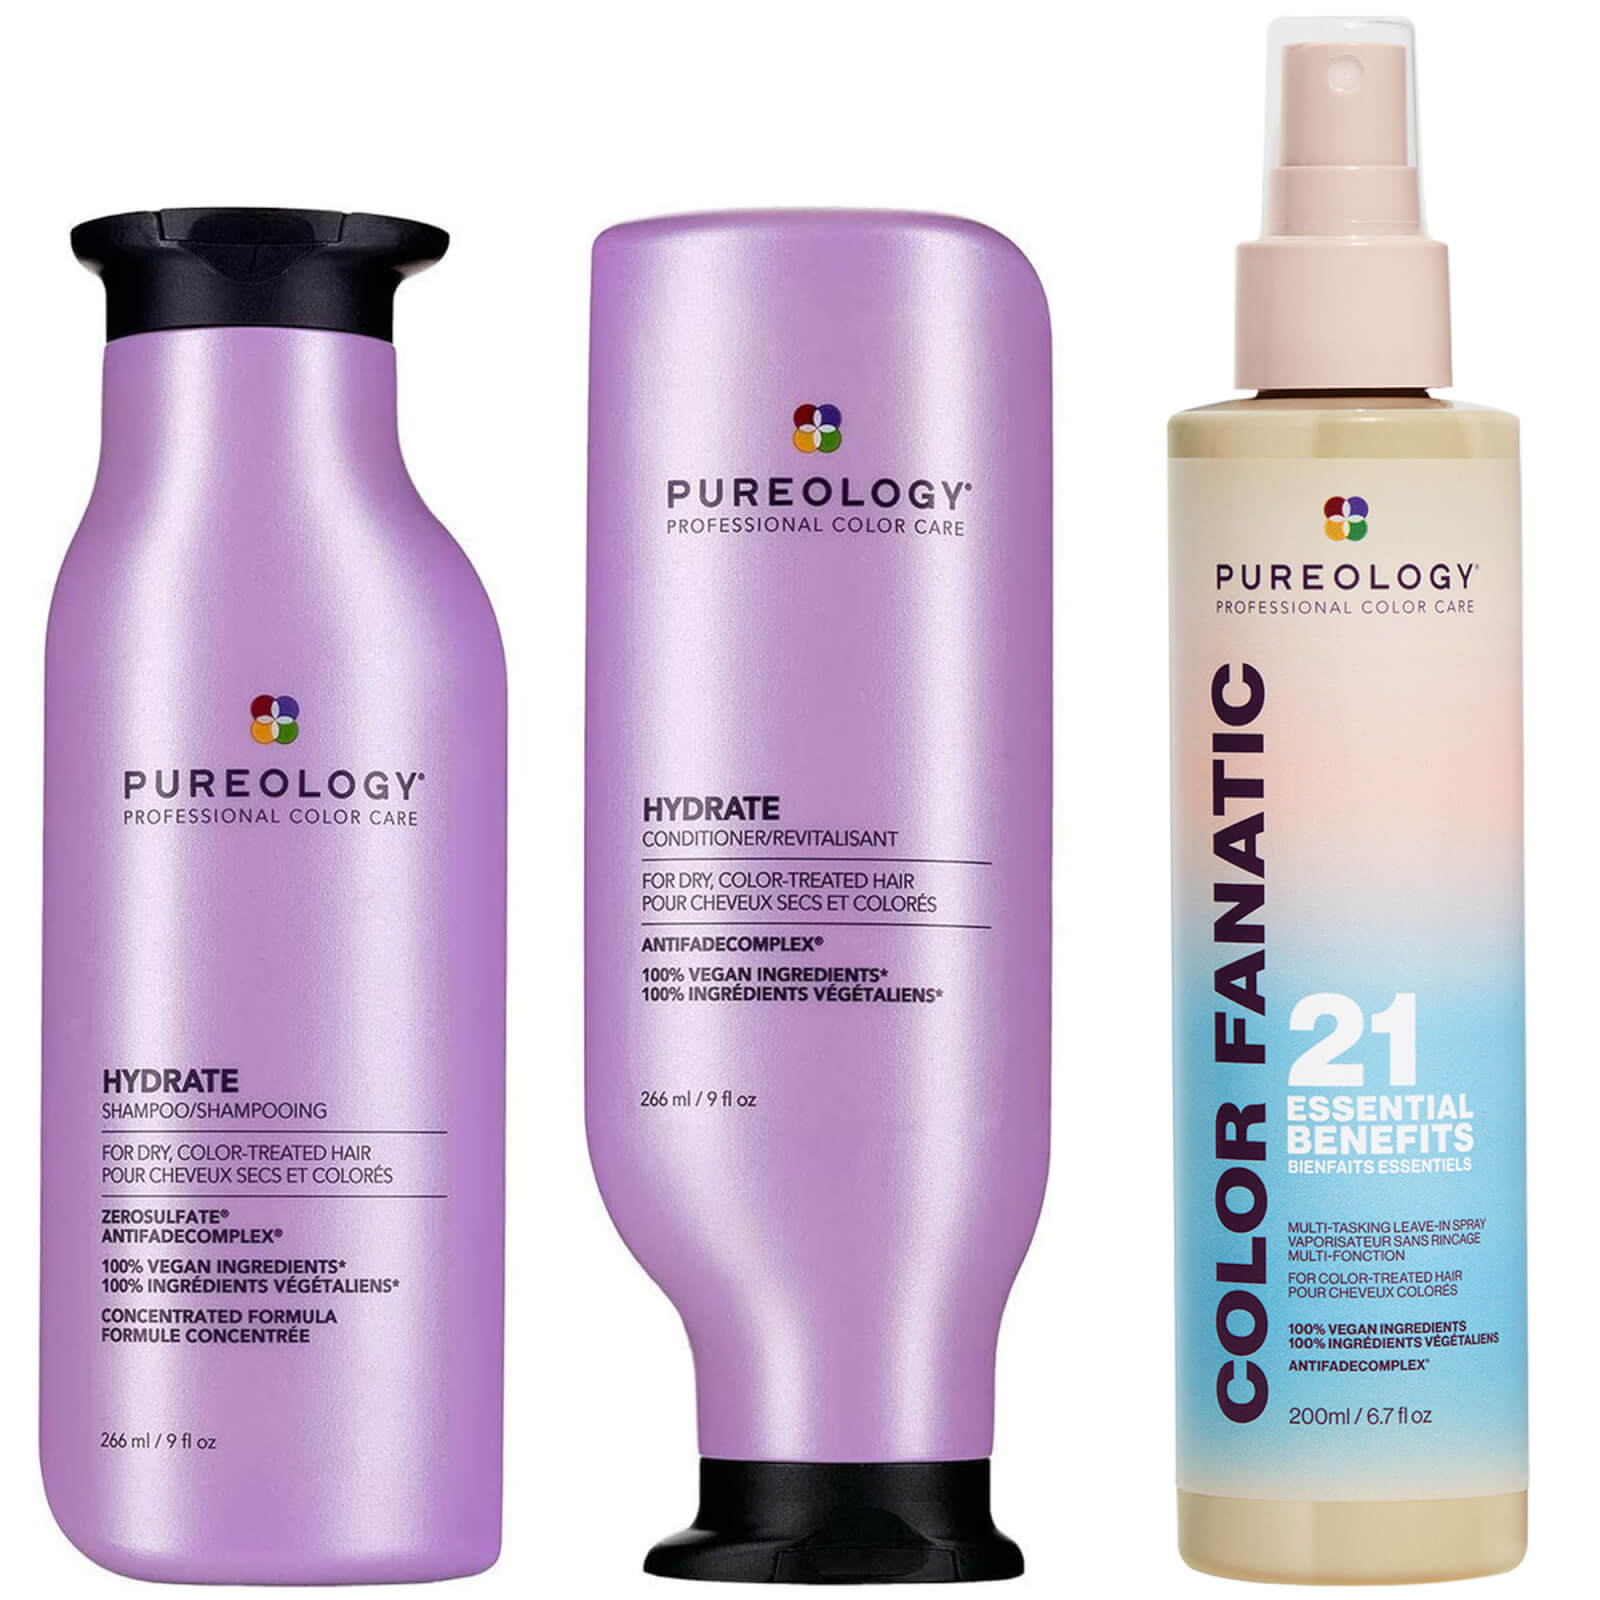 Pureology Hydrate Shampoo, Conditioner and Color Fanatic Multi-Benefit Leave-in, Moisturising Bundle